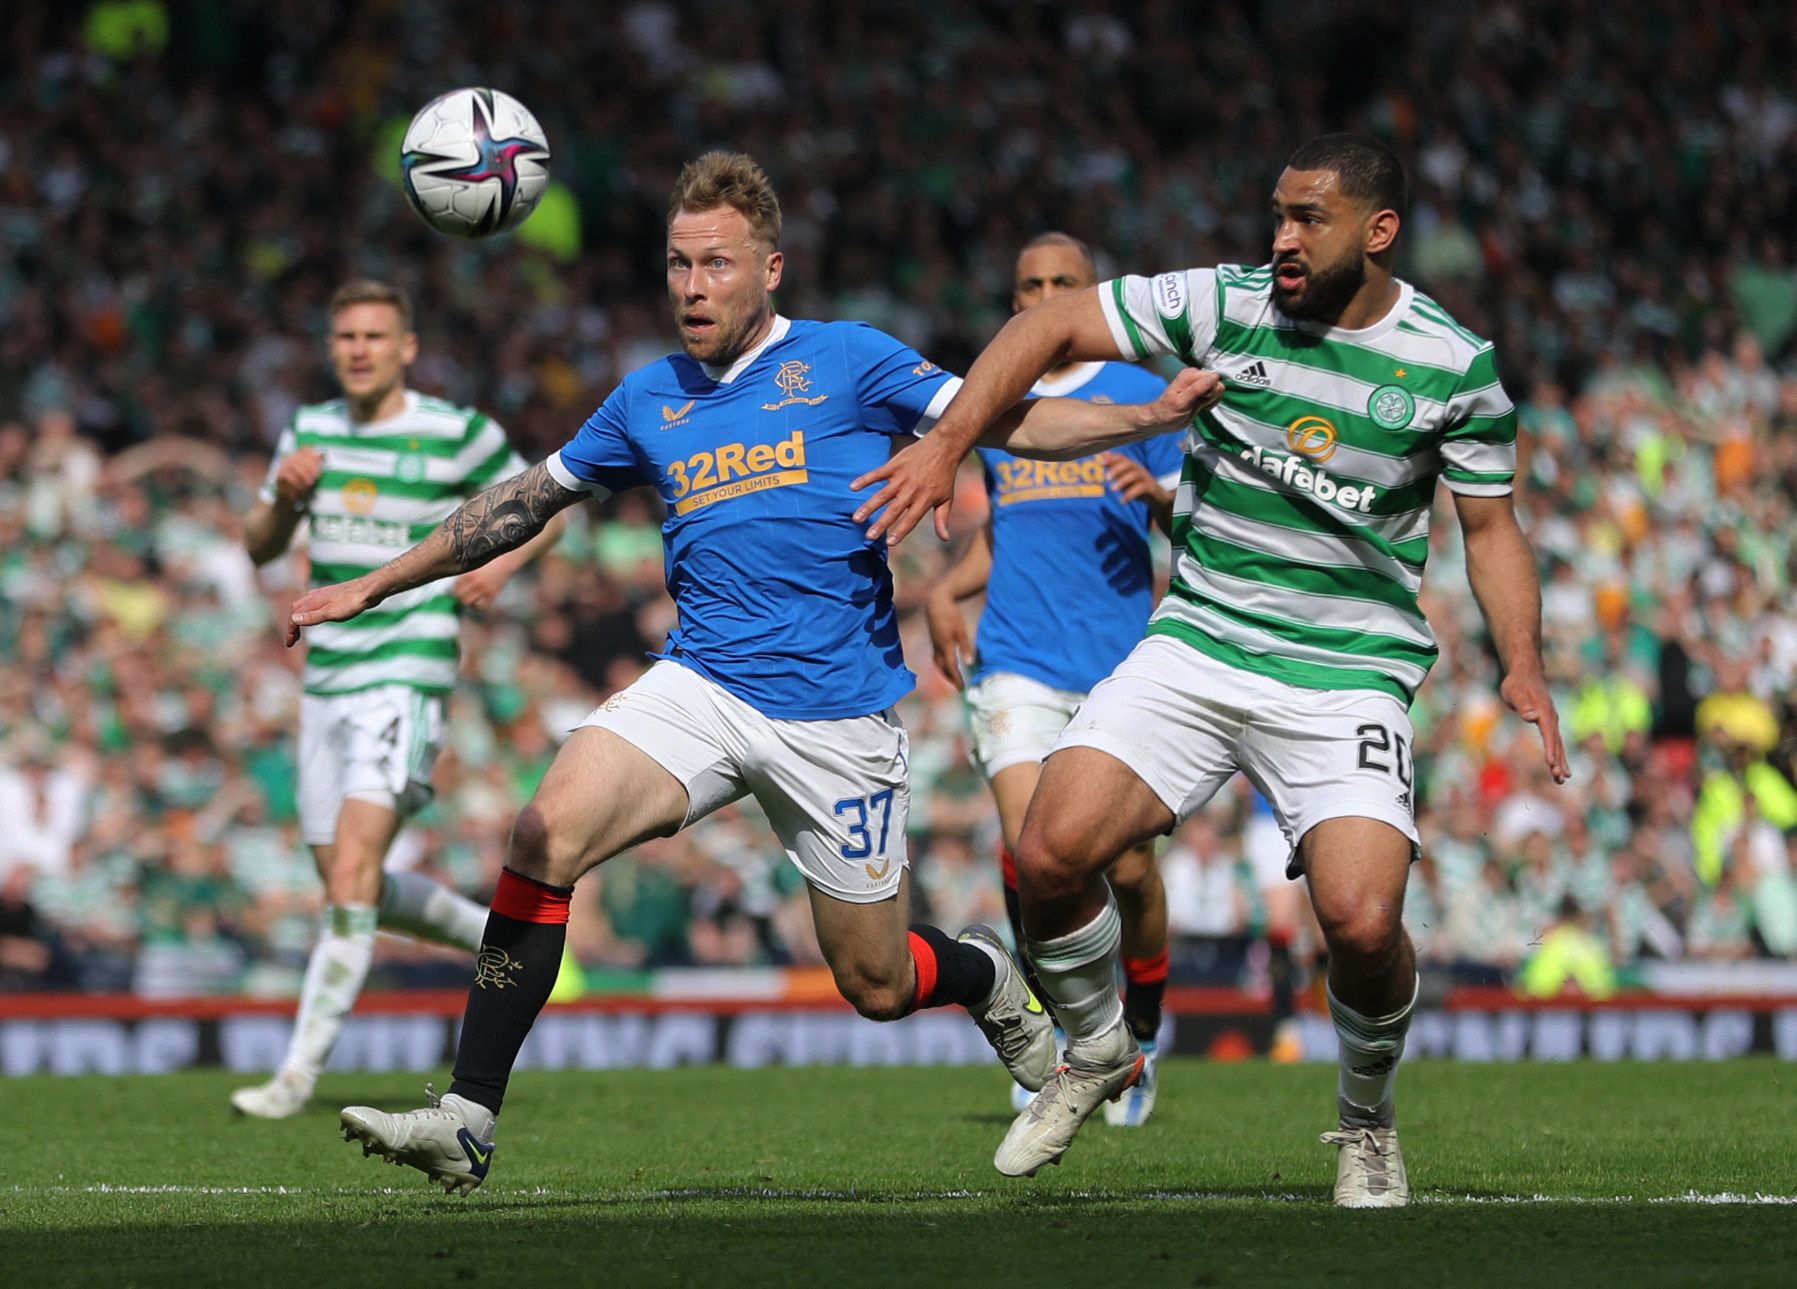 Soccer Football - Scottish Cup Semi Final - Celtic v Rangers - Hampden Park, Glasgow, Scotland, Britain - April 17, 2022 Rangers' Scott Arfield in action with Celtic's Cameron Carter-Vickers REUTERS/Russell Cheyne